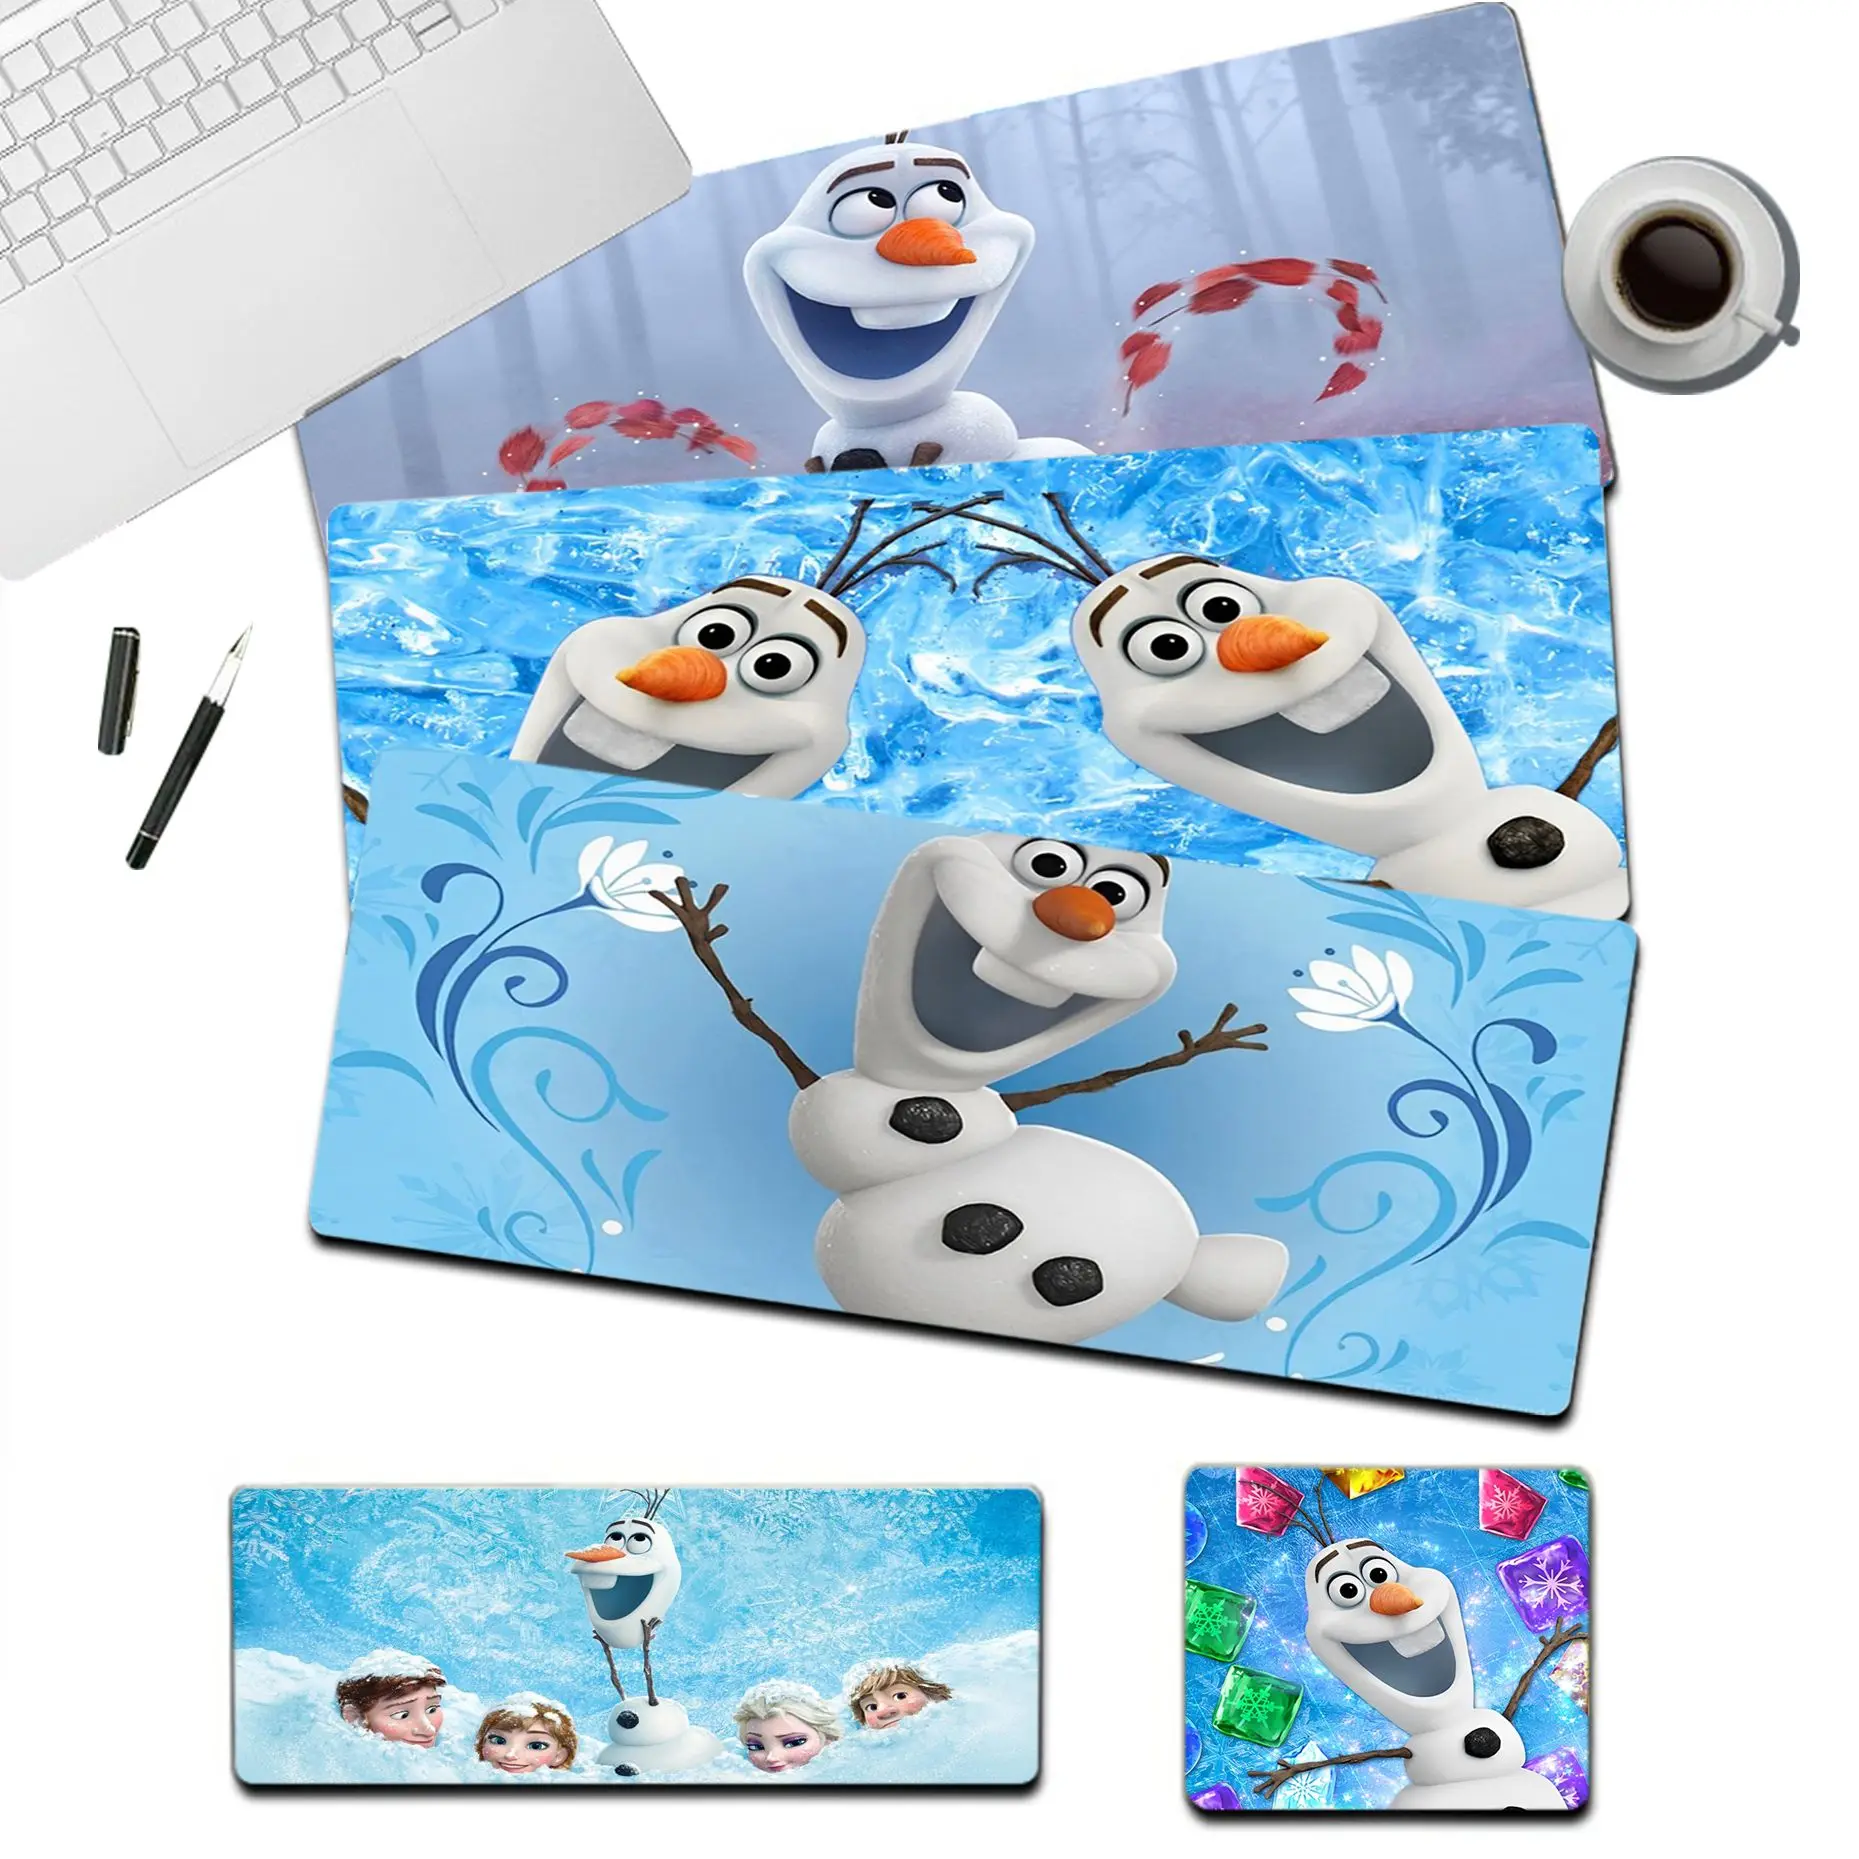 

Disney Olaf Snowman Frozen Custom Skin Mouse Pad Super Creative INS Tide Large Game Size For Game Keyboard Pad For Gamer